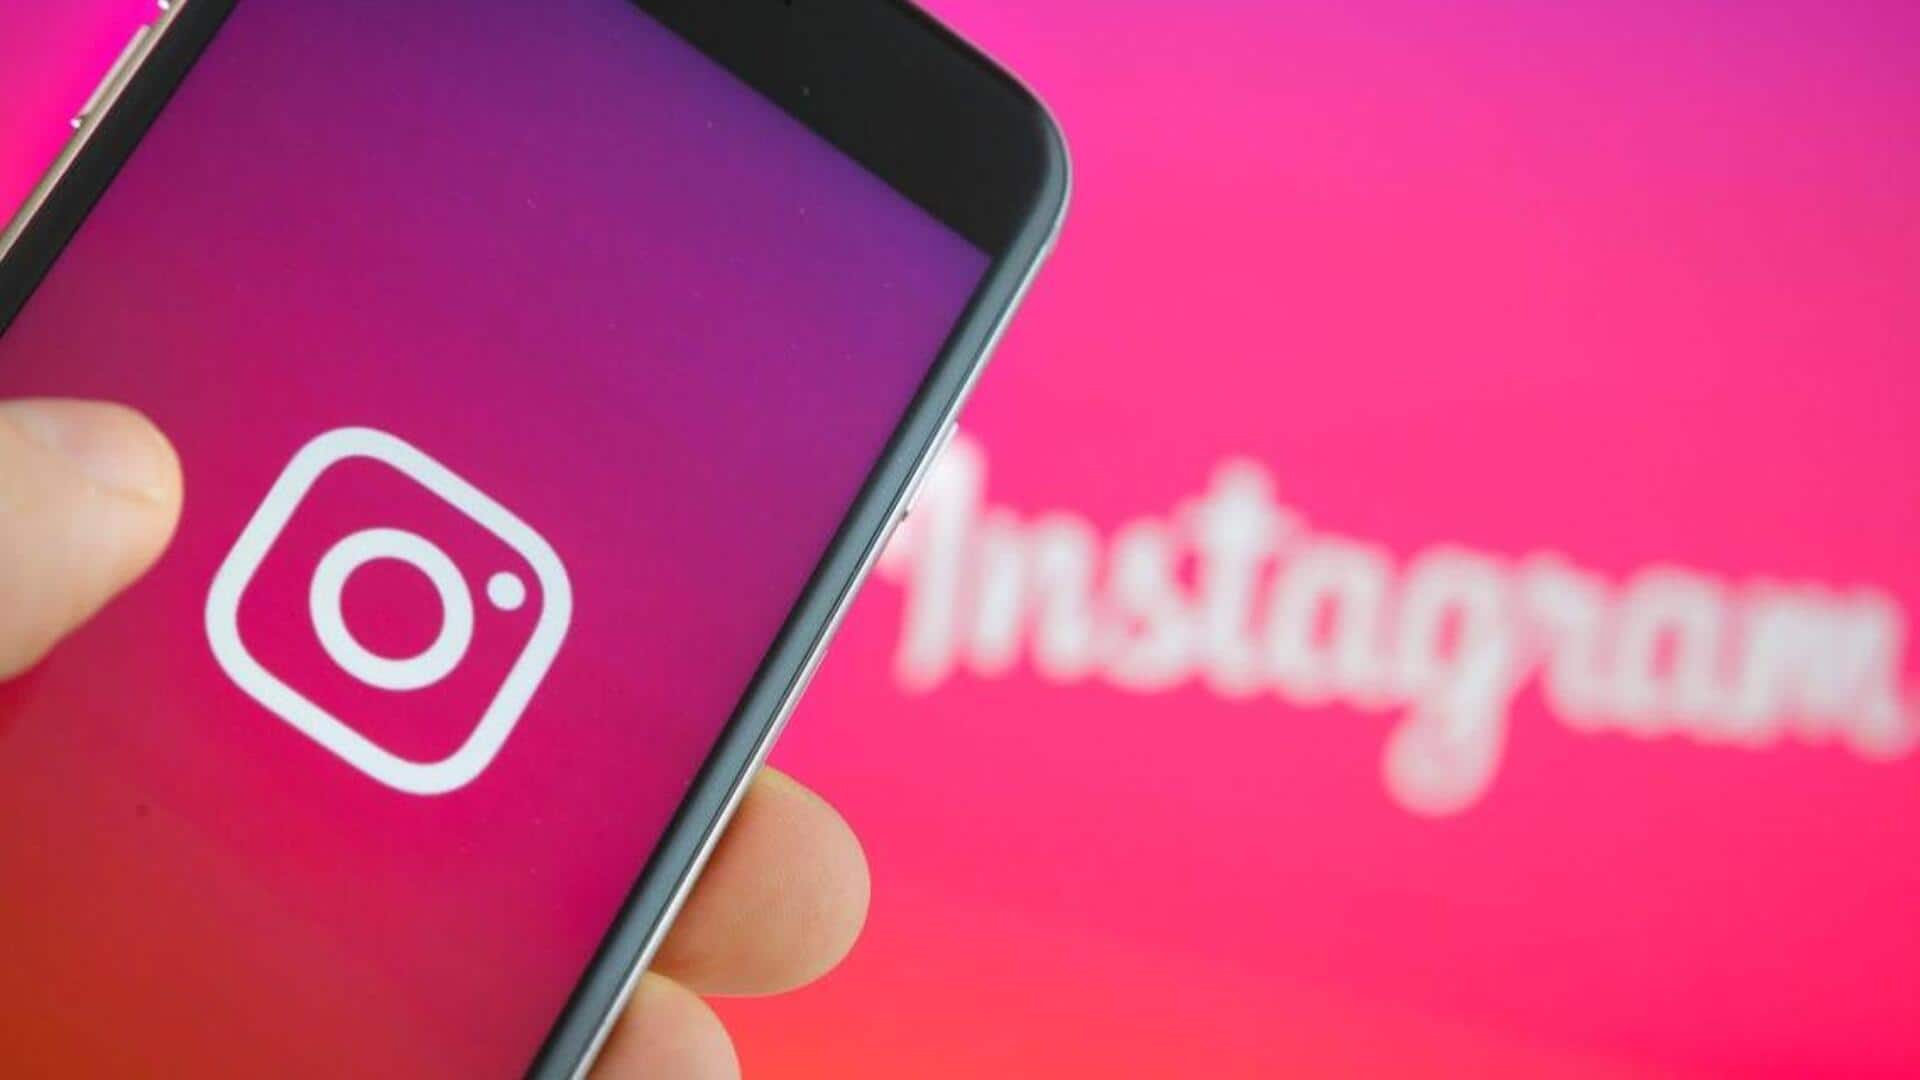 Instagram is profiting from ads promoting nonconsensual nude image creation